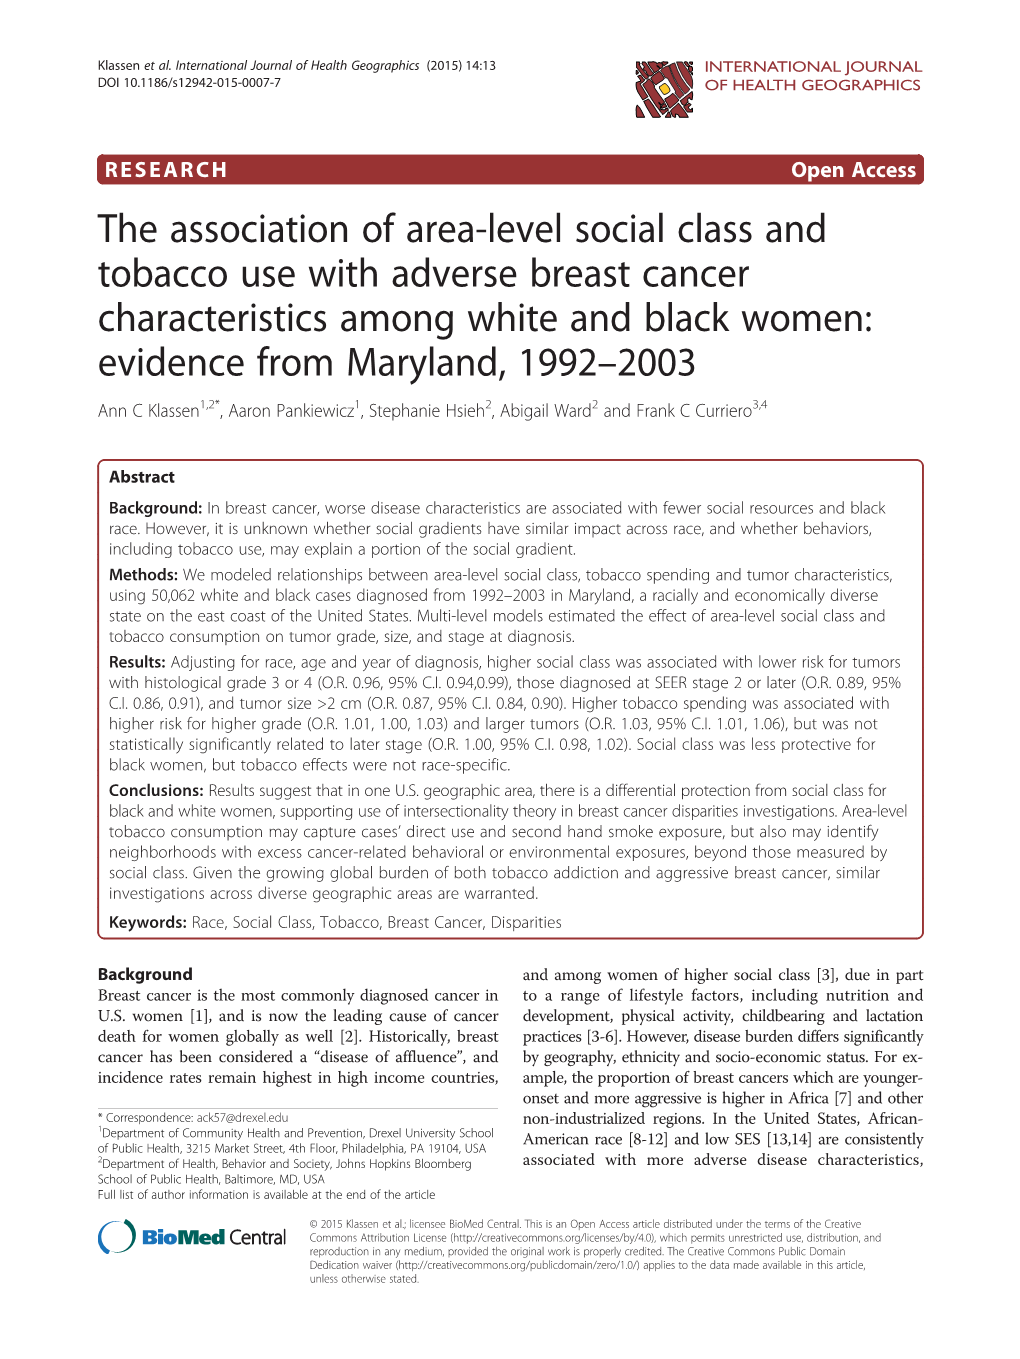 The Association of Area-Level Social Class and Tobacco Use with Adverse